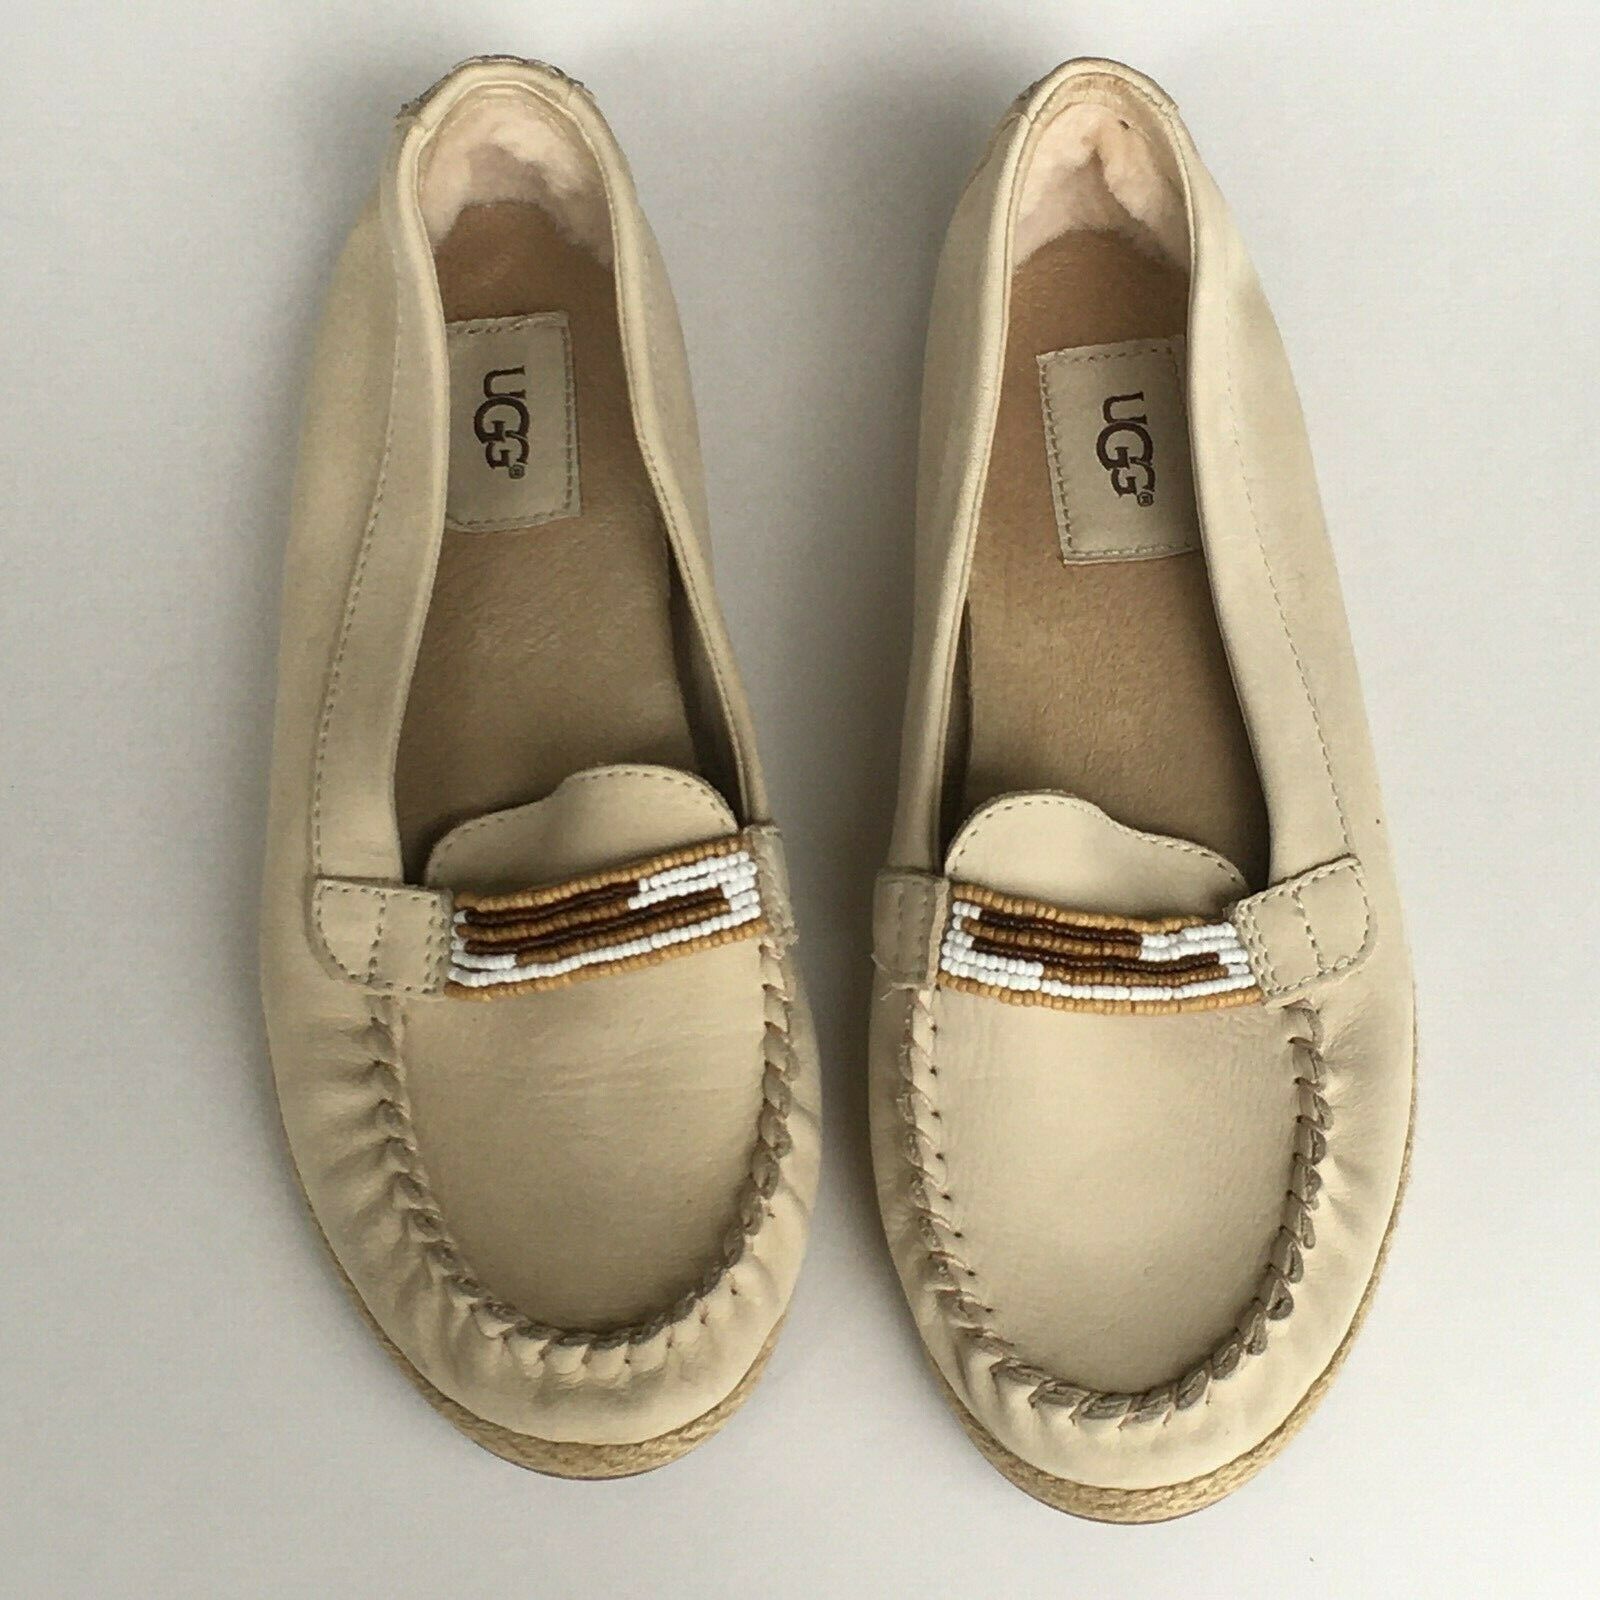 Primary image for UGG Australia Womens Rozie Slip On Leather Shoes Beade Loafer Flats Moccasin